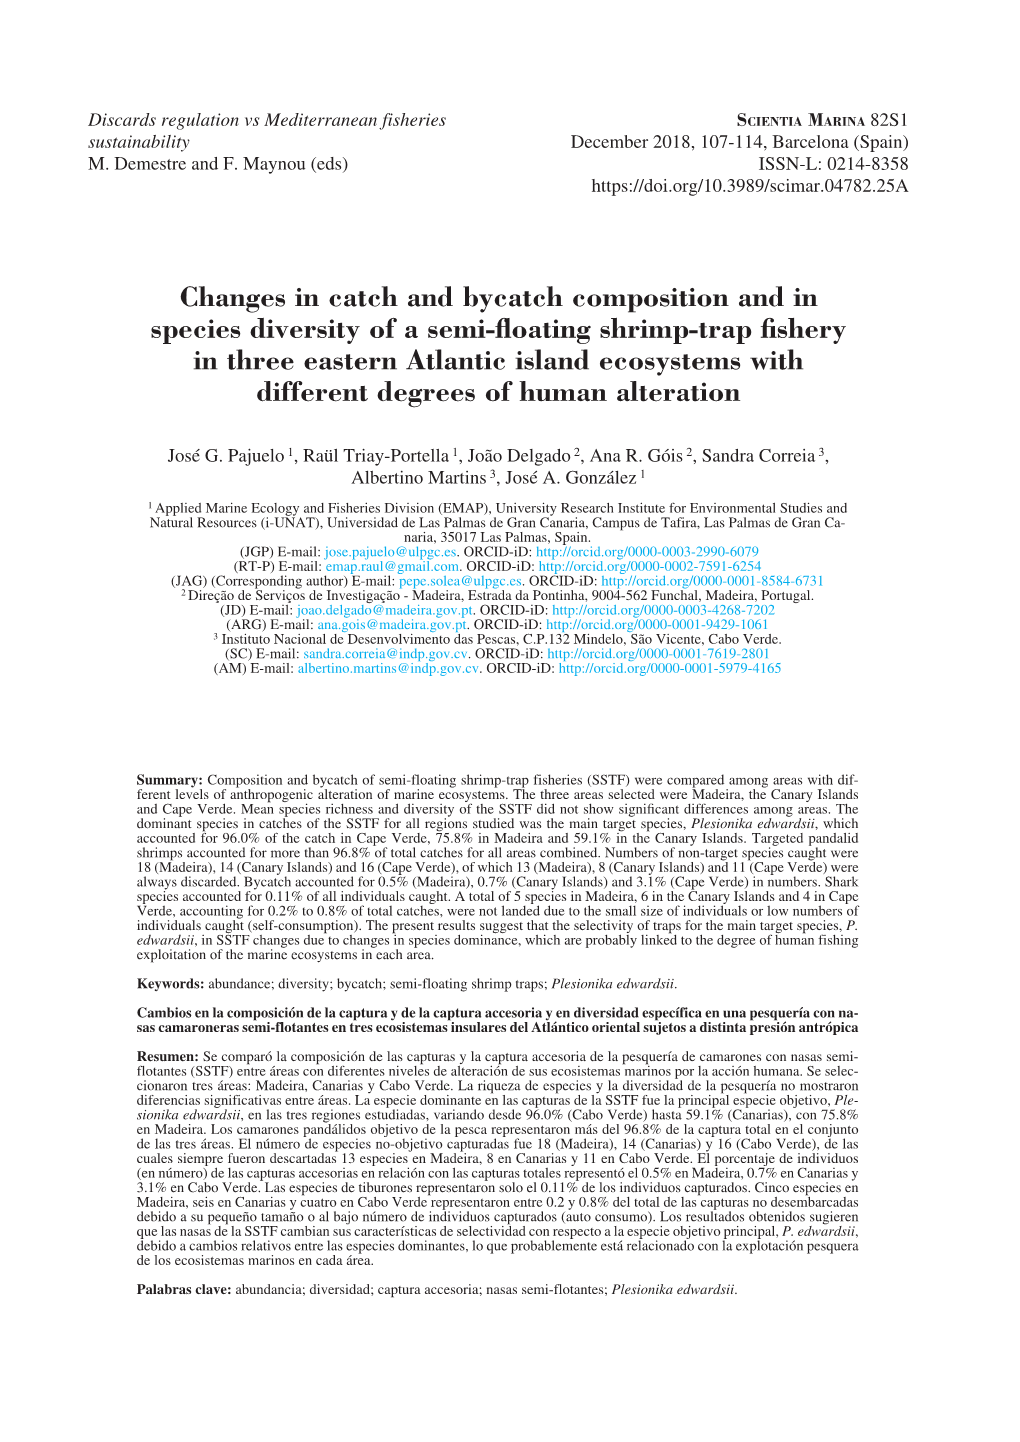 Changes in Catch and Bycatch Composition And